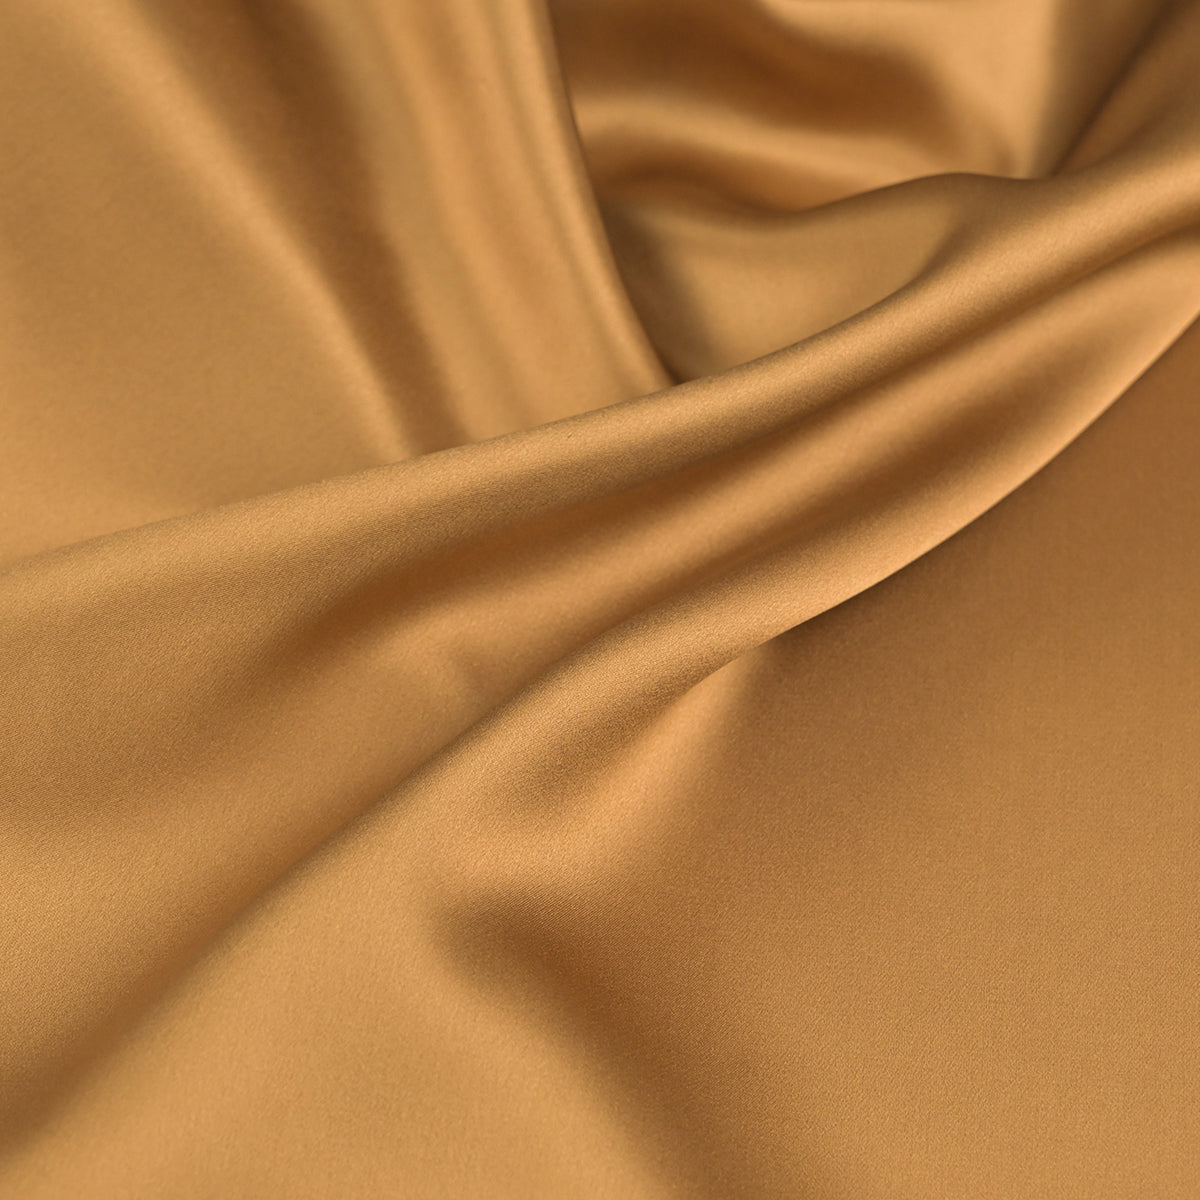 Wrinkled blouseweight satin beige silk with a luxurious and elegant feel